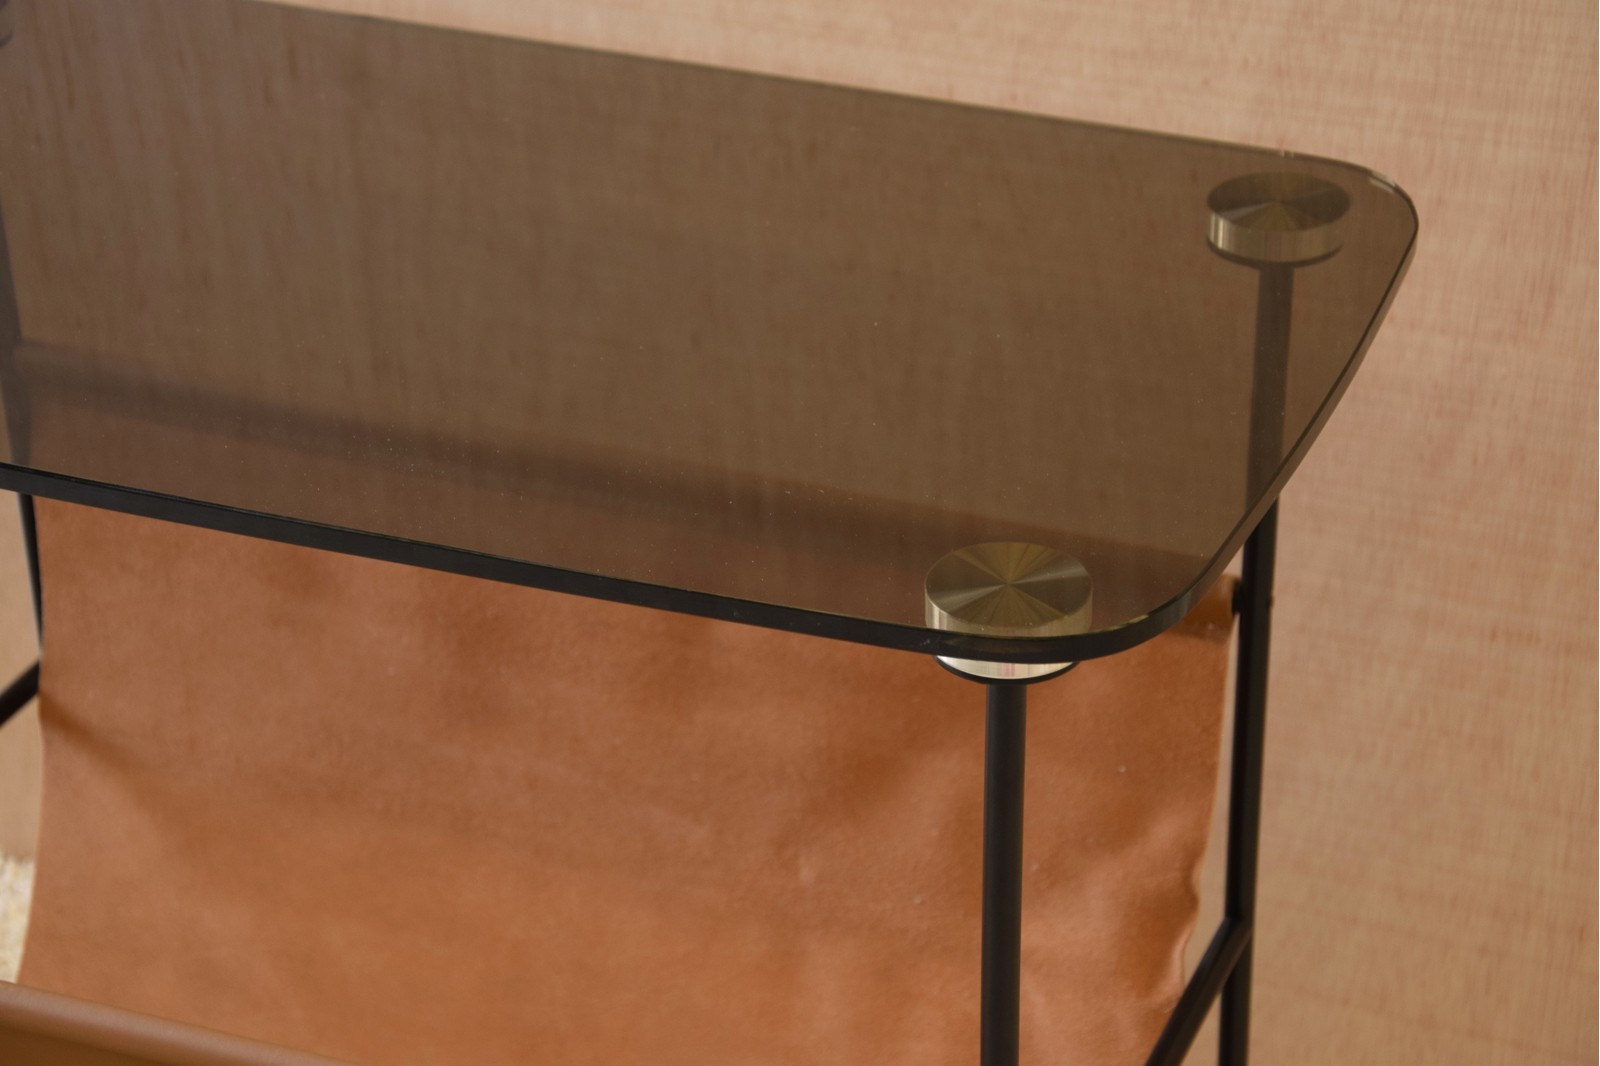 SIDE TABLE WITH FOLDER